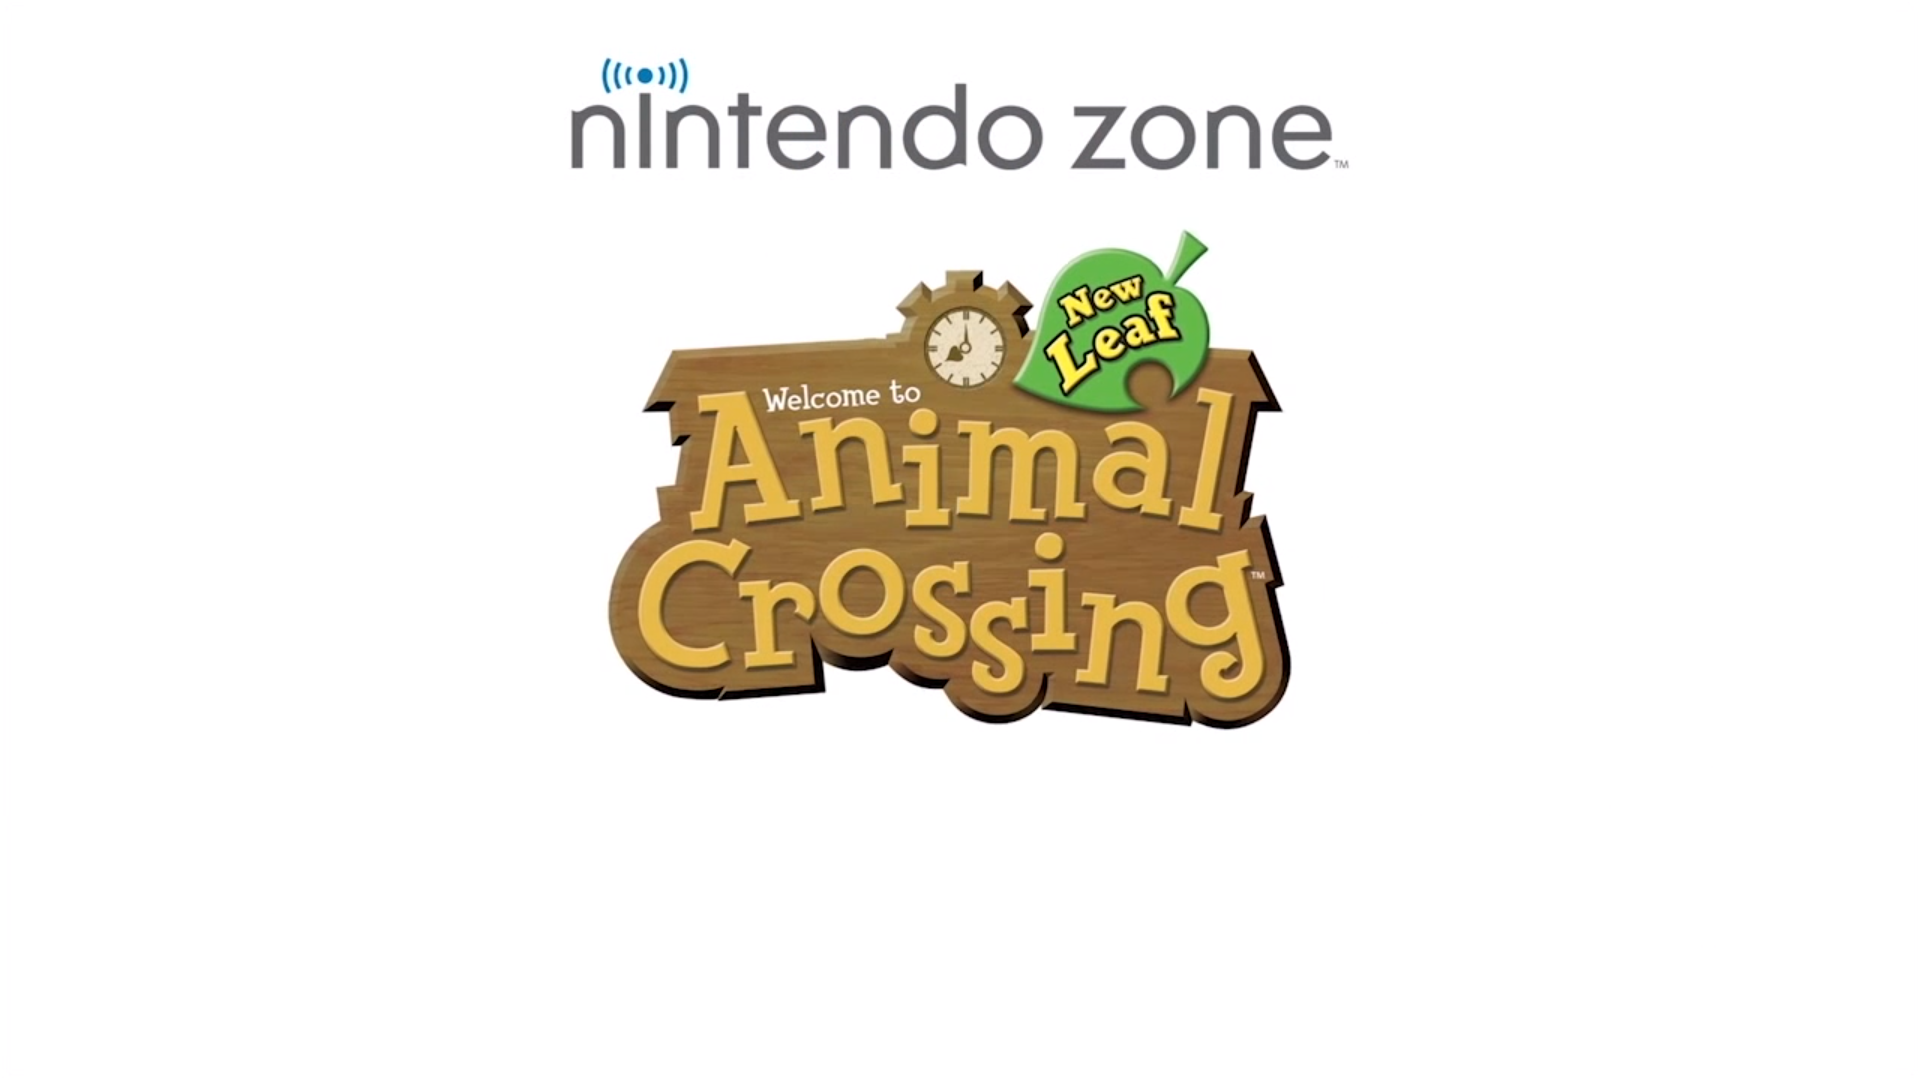 Animal Crossing: New Leaf Items Being Distributed Through Nintendo Zone Locations